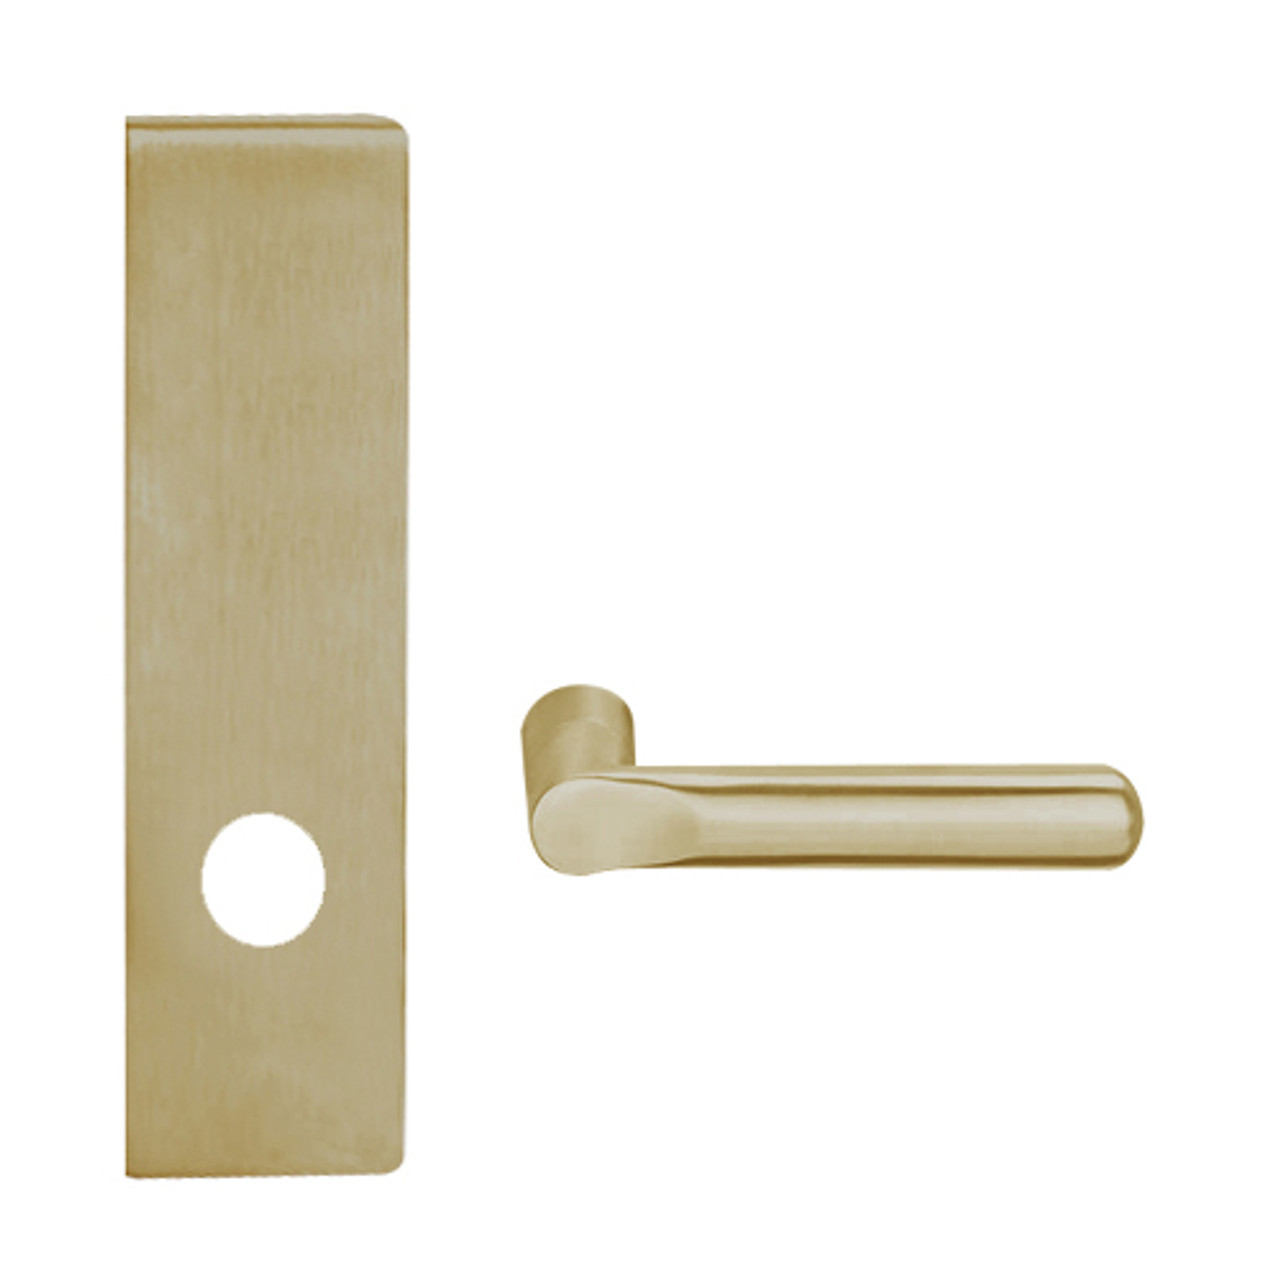 L9440-18N-613 Schlage L Series Privacy with Deadbolt Commercial Mortise Lock with 18 Cast Lever Design in Oil Rubbed Bronze